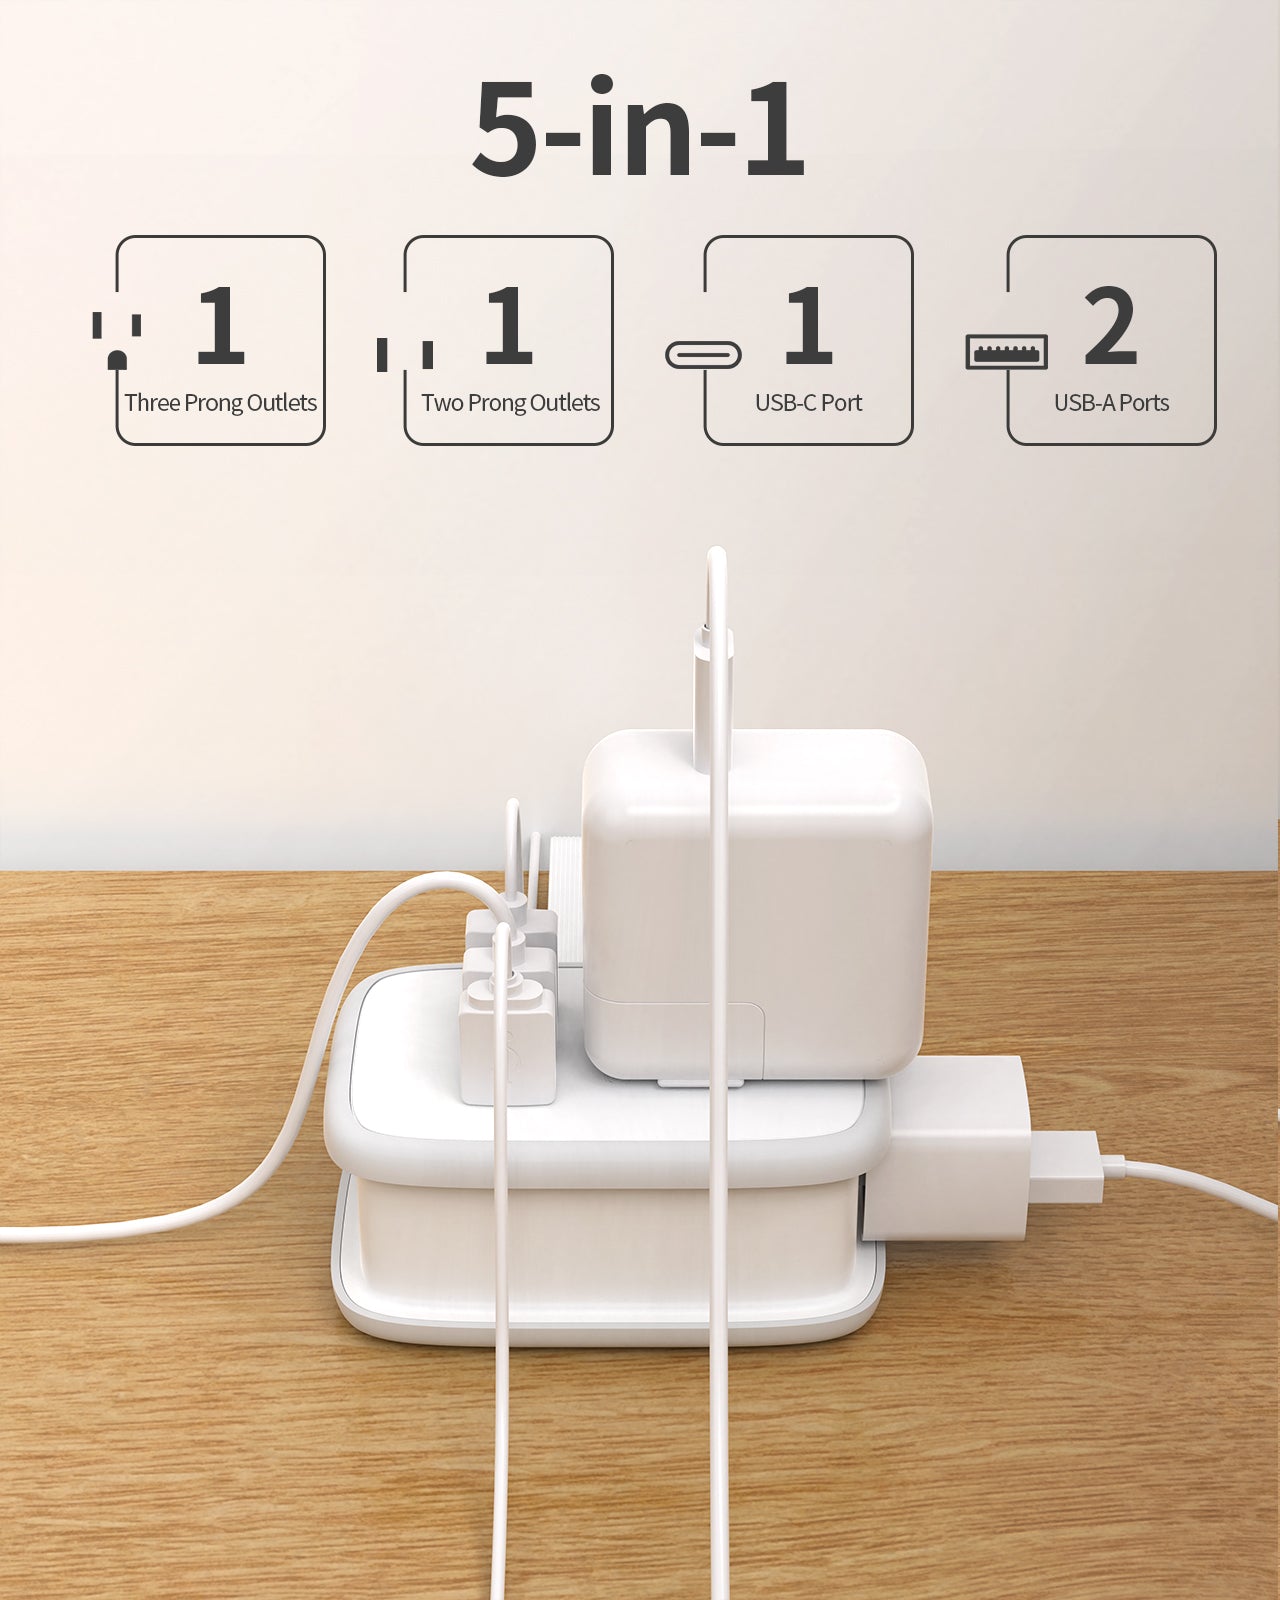 Ntonpower New Pocket Power Strip 2 Outlets 3 USB Ports(1 Type C)